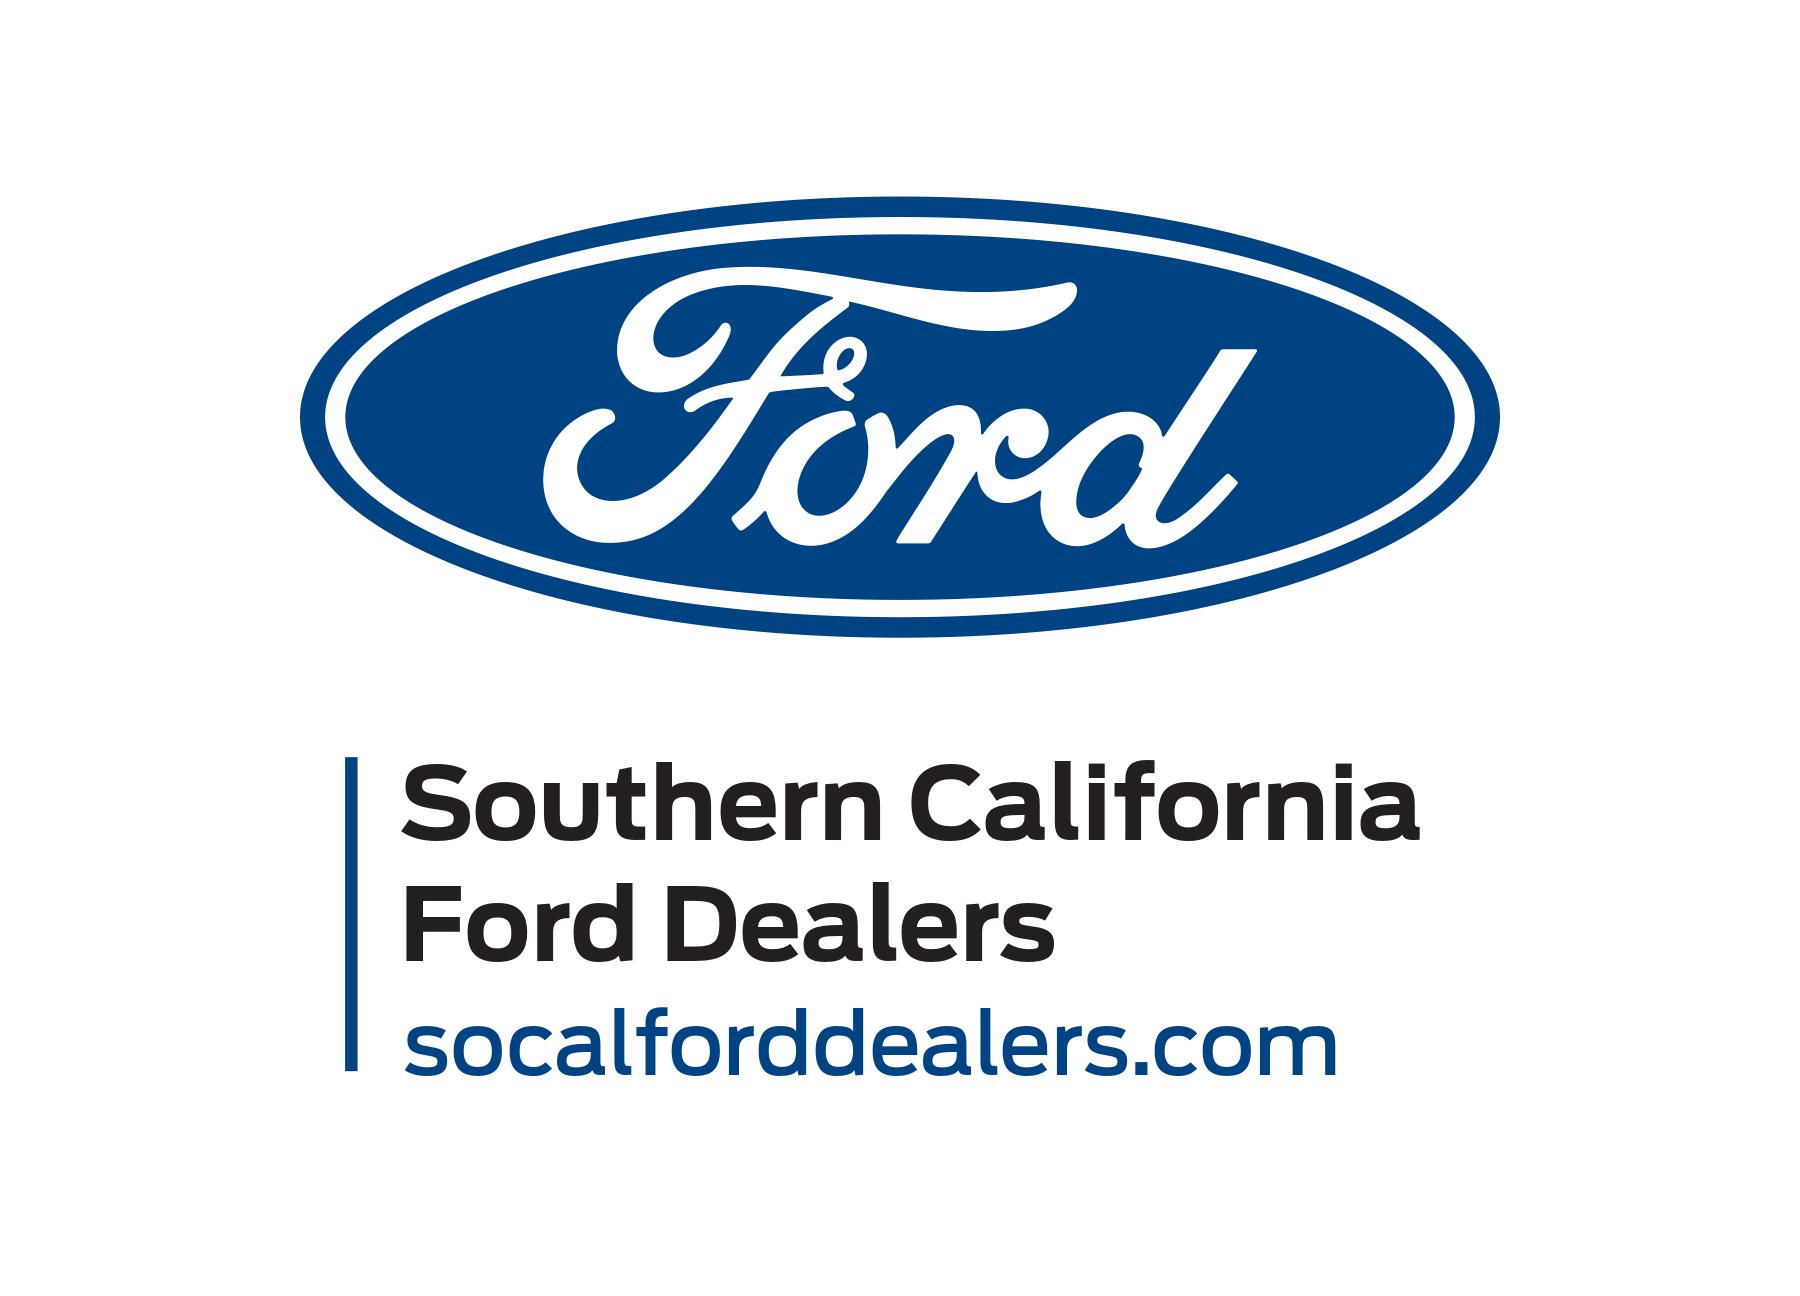 Southern California Ford Dealers